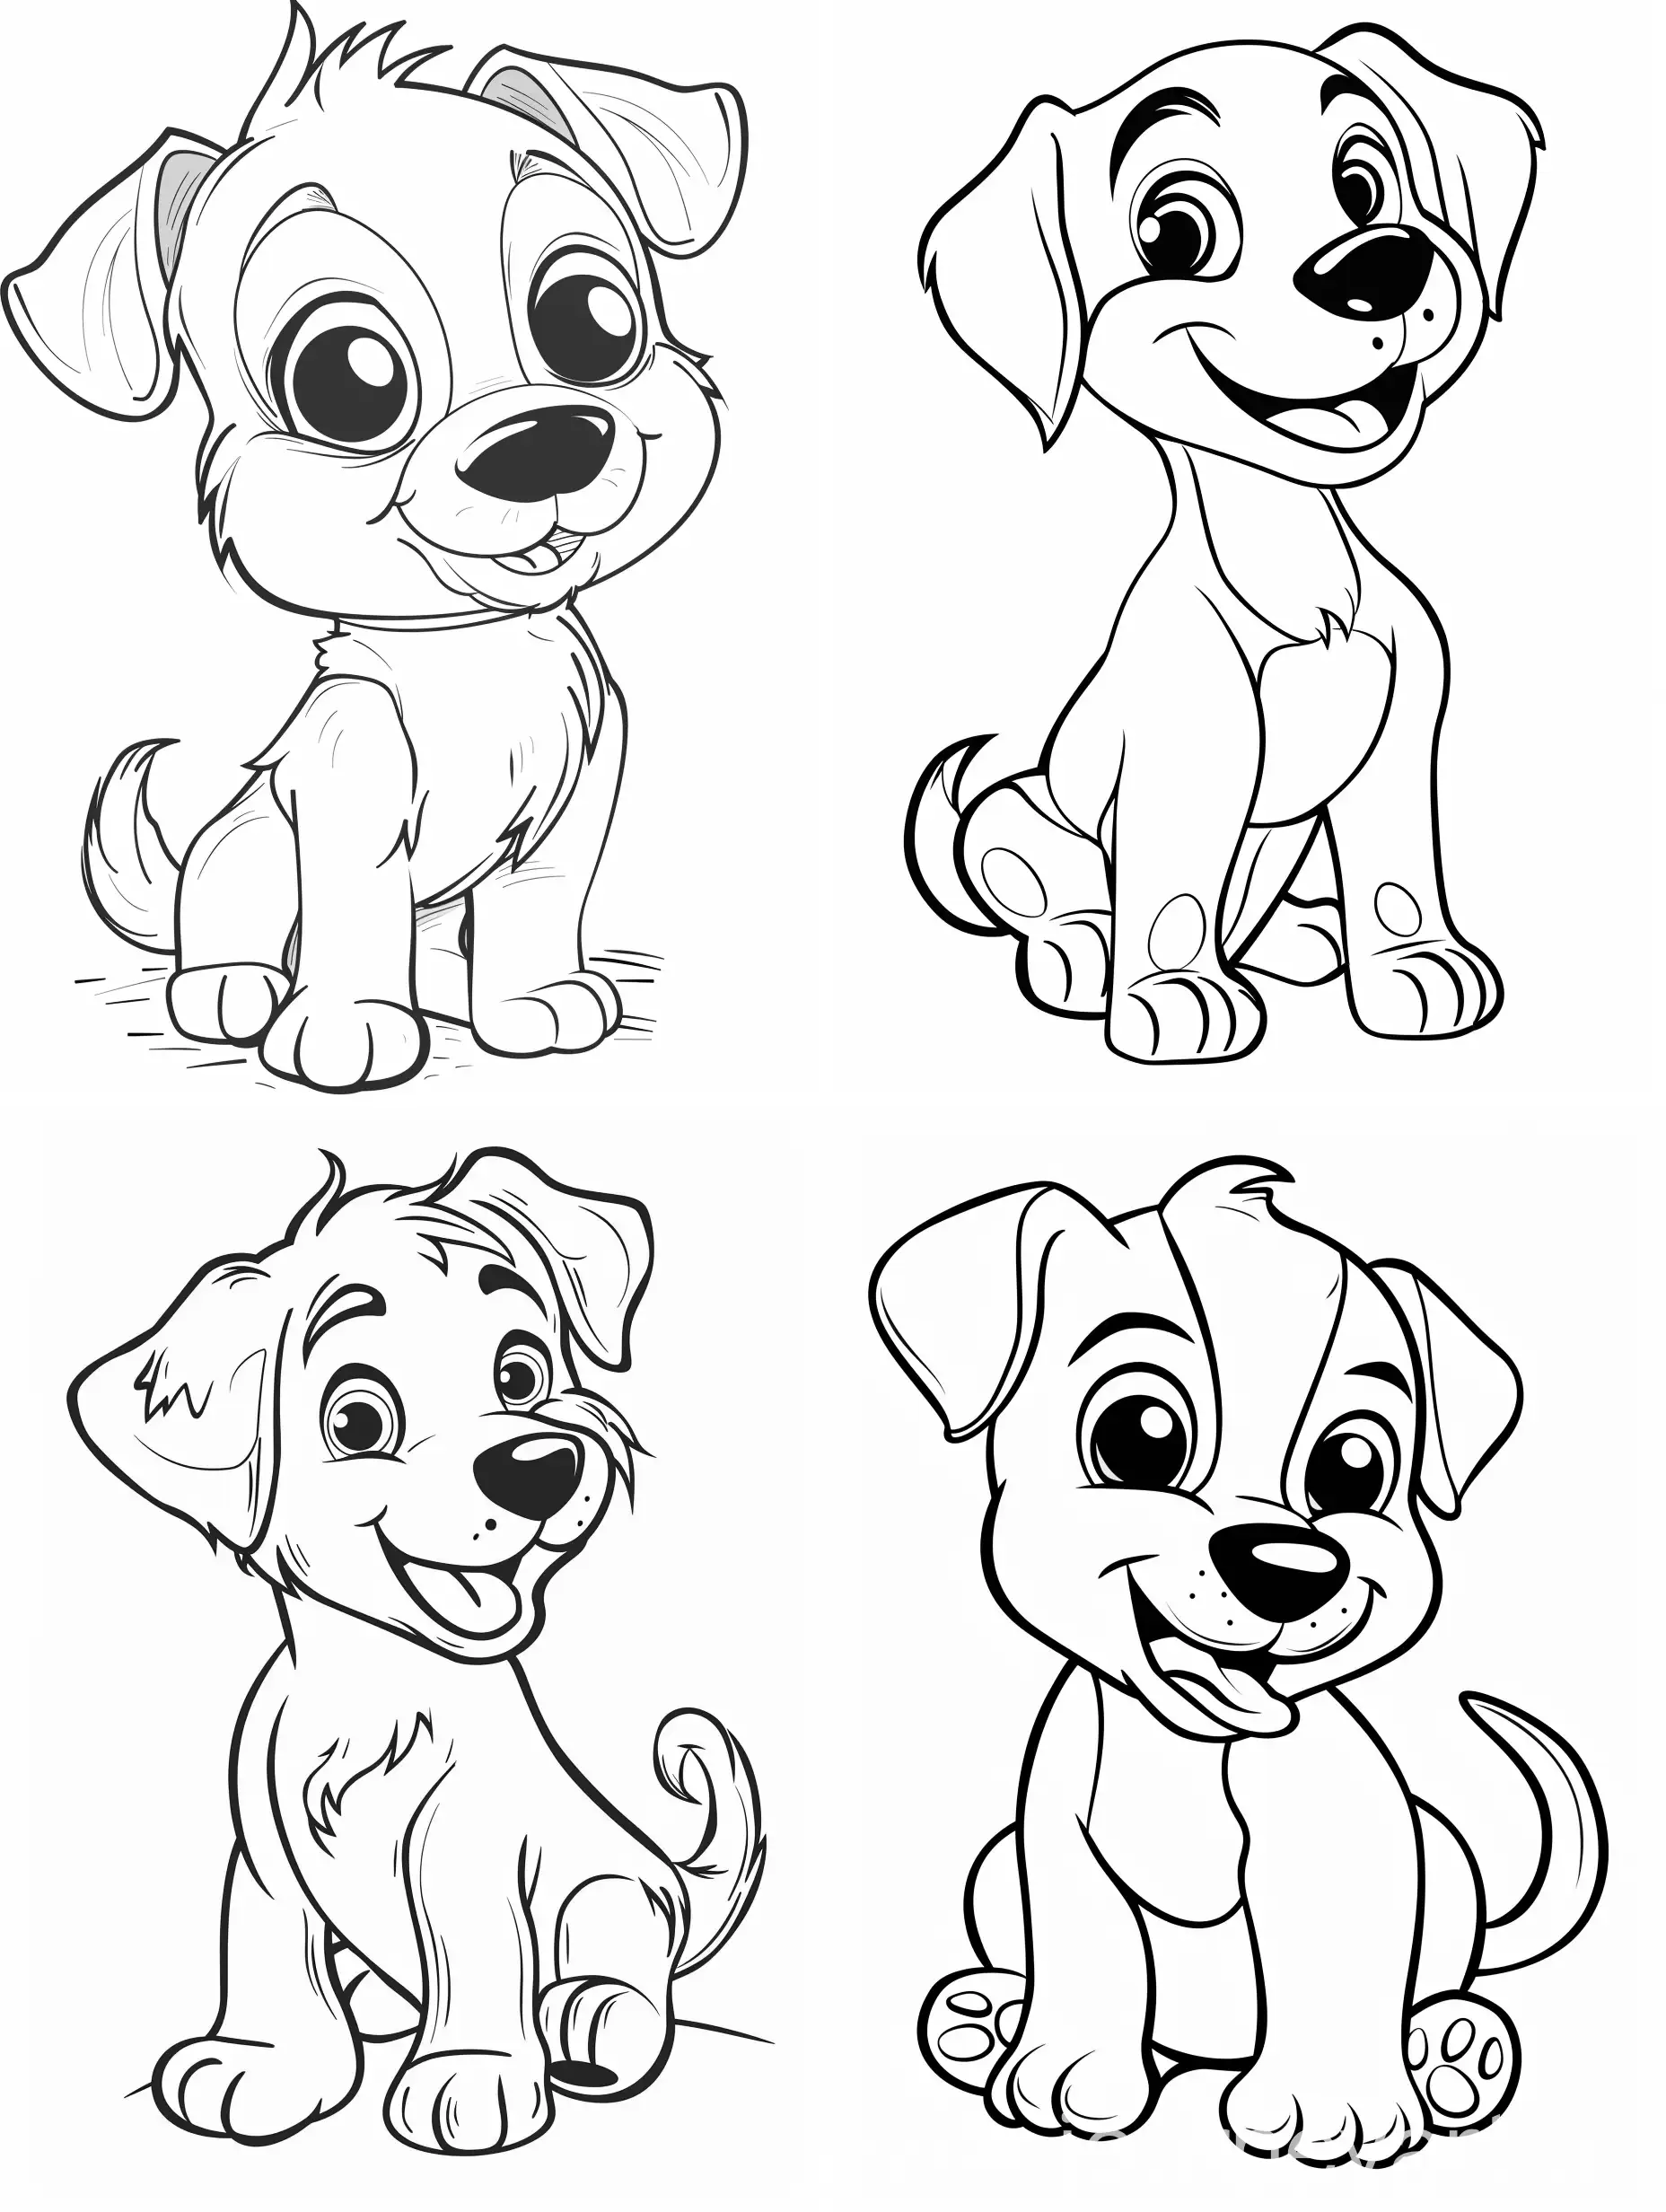 Childrens-Coloring-Book-Illustration-of-a-Cute-Dog